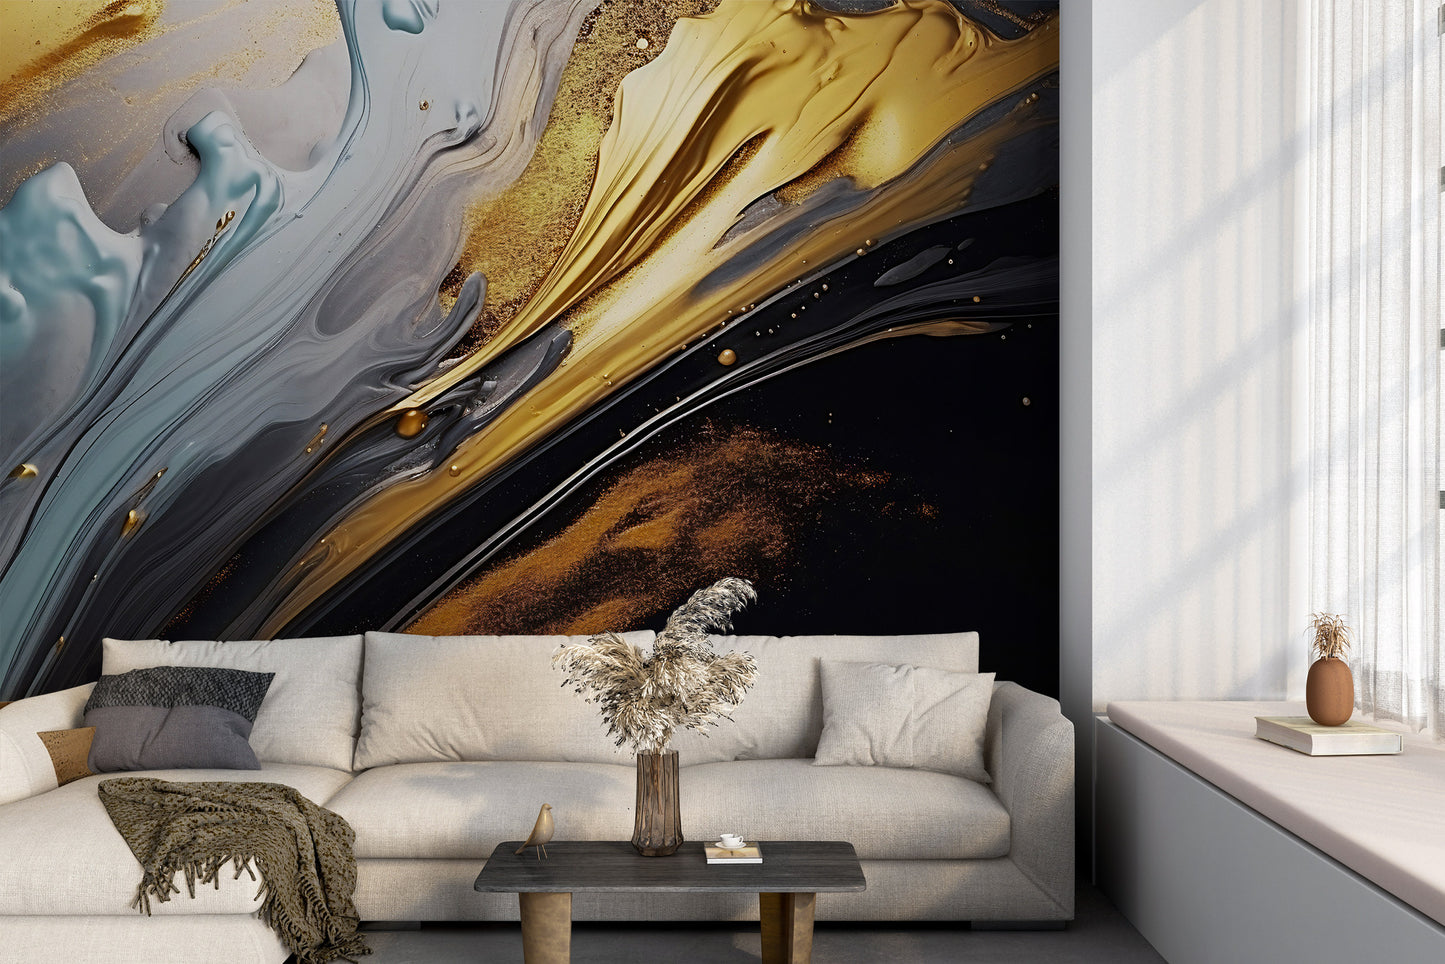 Removable Living Room Wall Art with Captivating Abstract Design